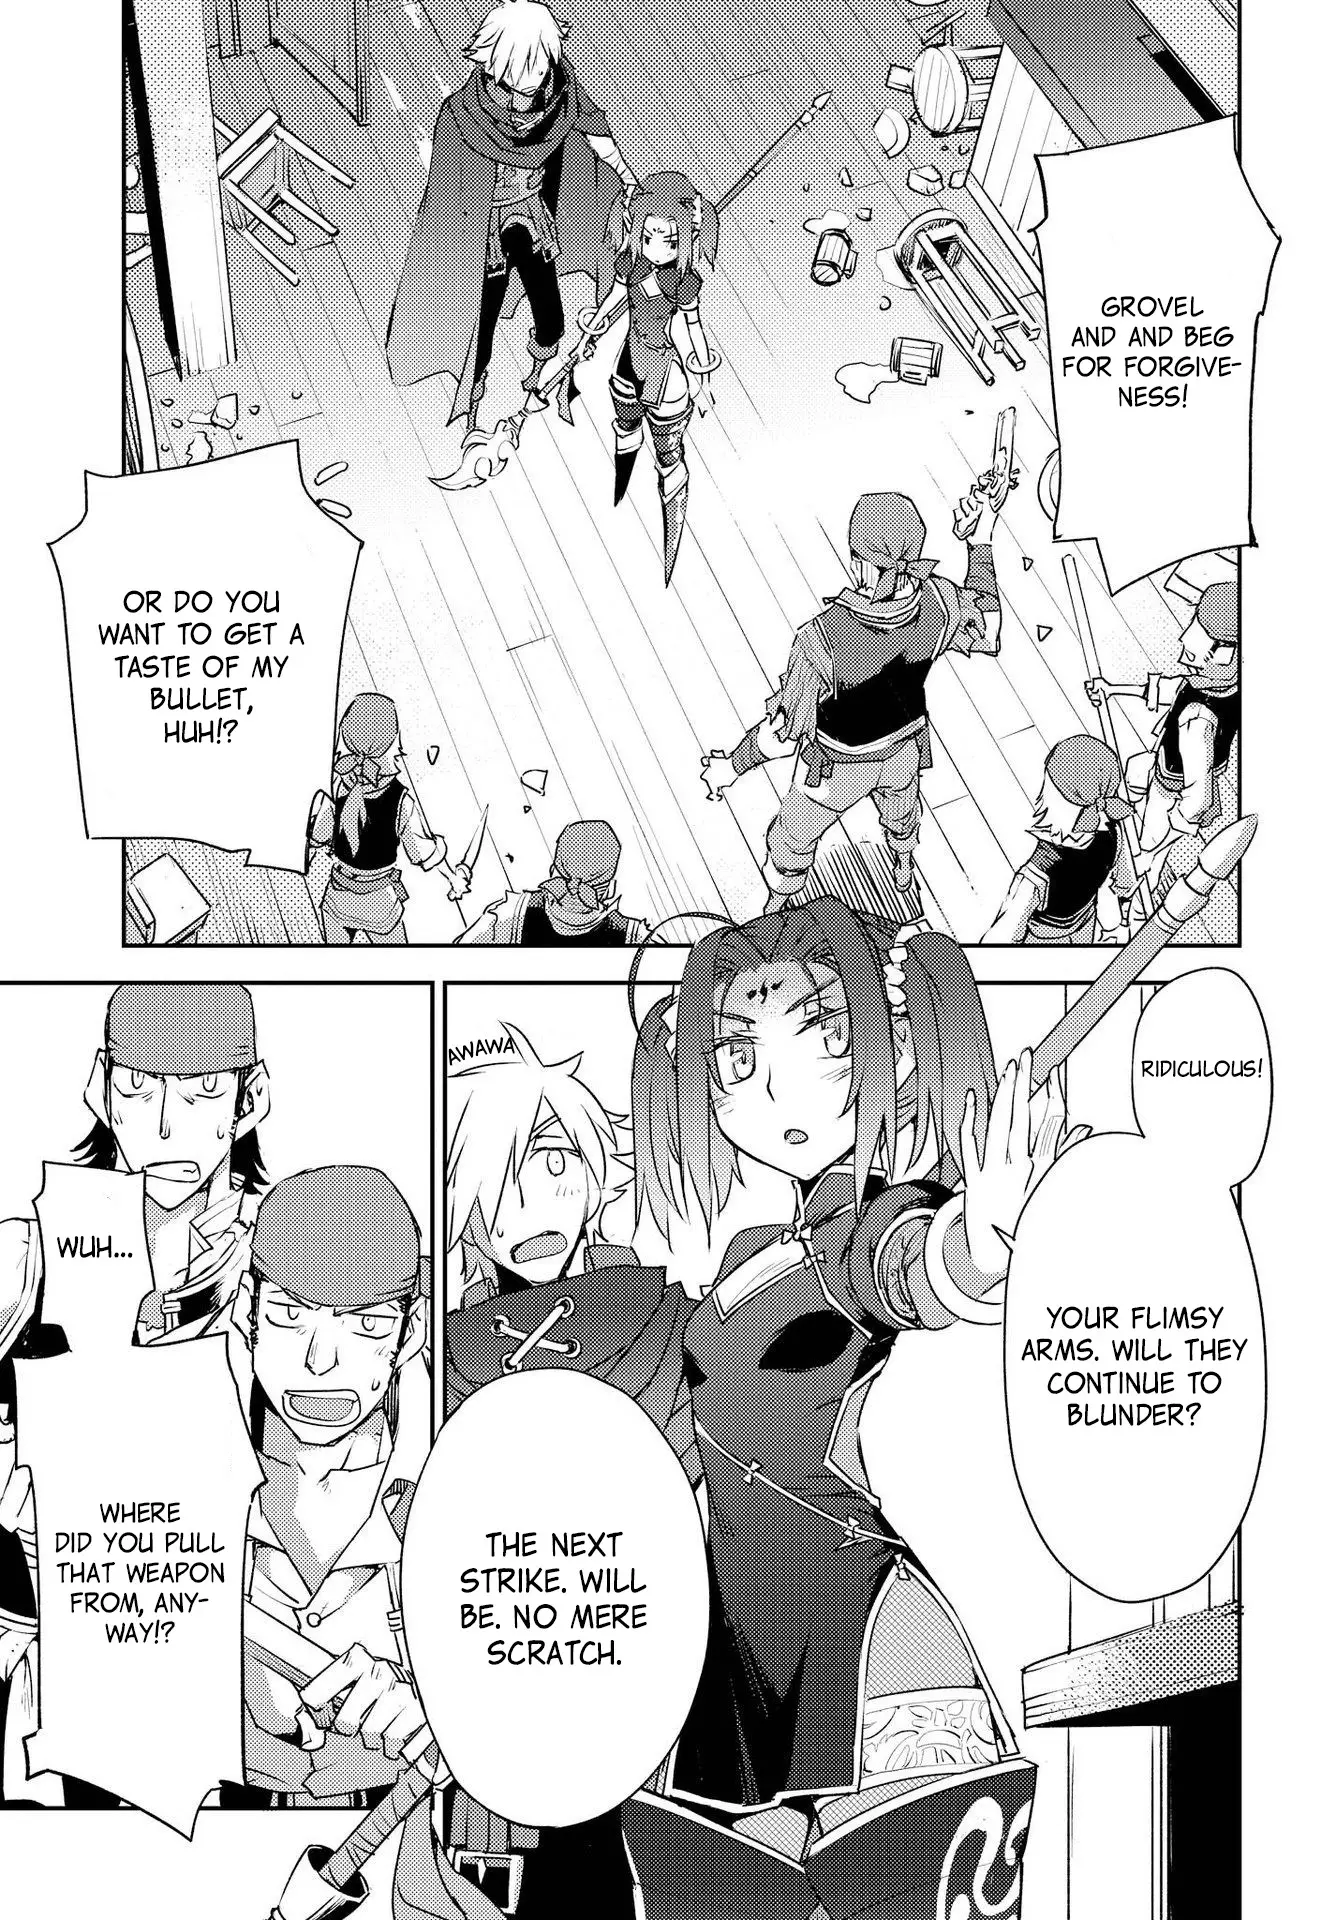 Fate/grand Order: Epic Of Remnant - Subspecies Singularity Iv: Taboo Advent Salem: Salem Of Heresy - 5 page 21